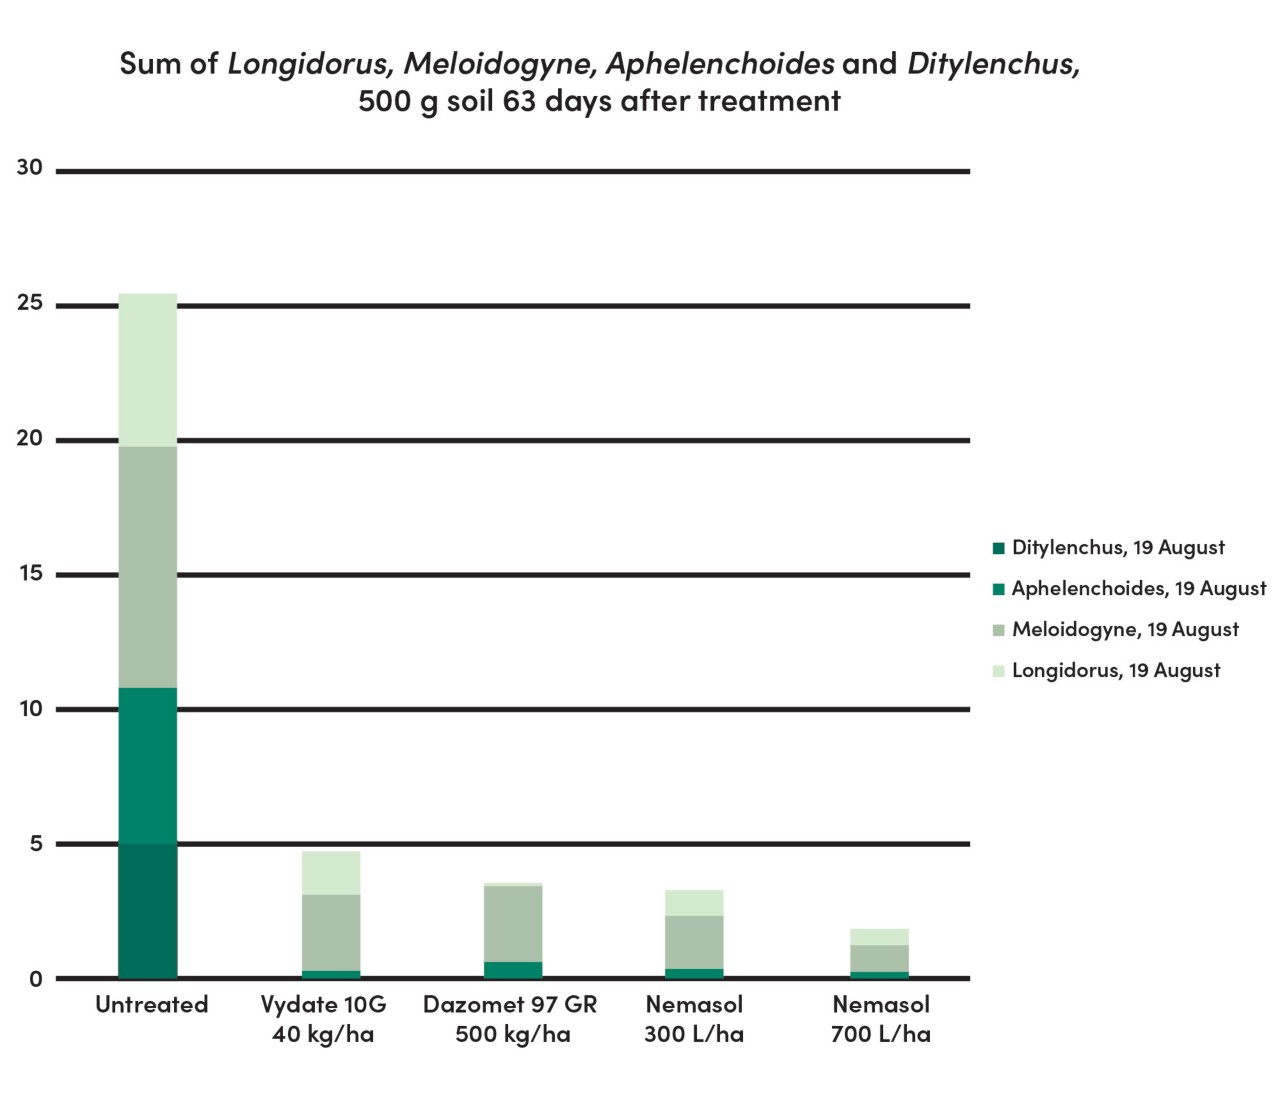  Graphic sum of Longidorus, Meloidogyne, Aphelenchoides and Dytilenchus per 500 grams of soil after 63 days of treatment 